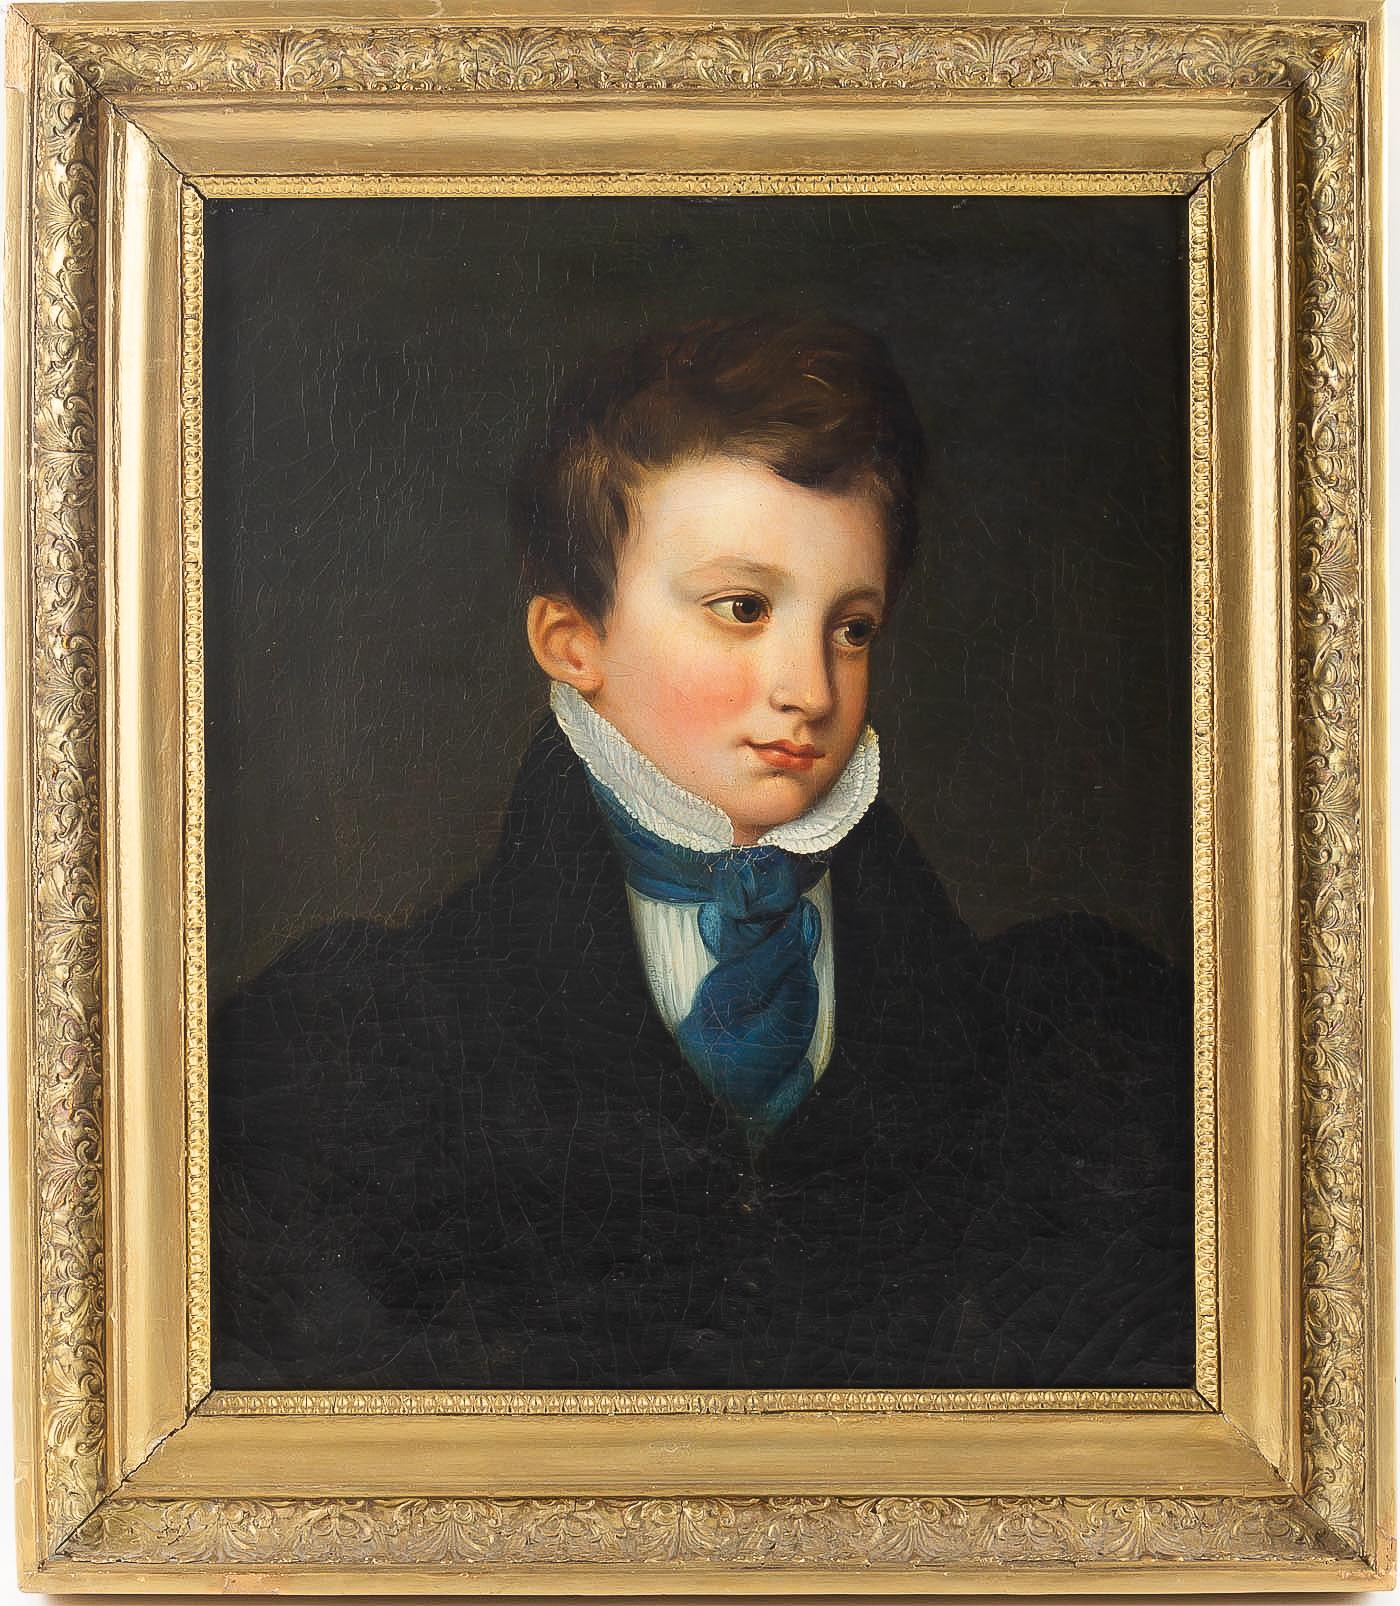 Celestine Beaugais oil on canvas Portait de Anatole Jules Marie Chevallier, circa 1831.

Much quality and elegance in this portrait of this young boy, identified as Anatole Jule Marie Chevallier de la Petite-Rivière, by Celestine Beaugais in